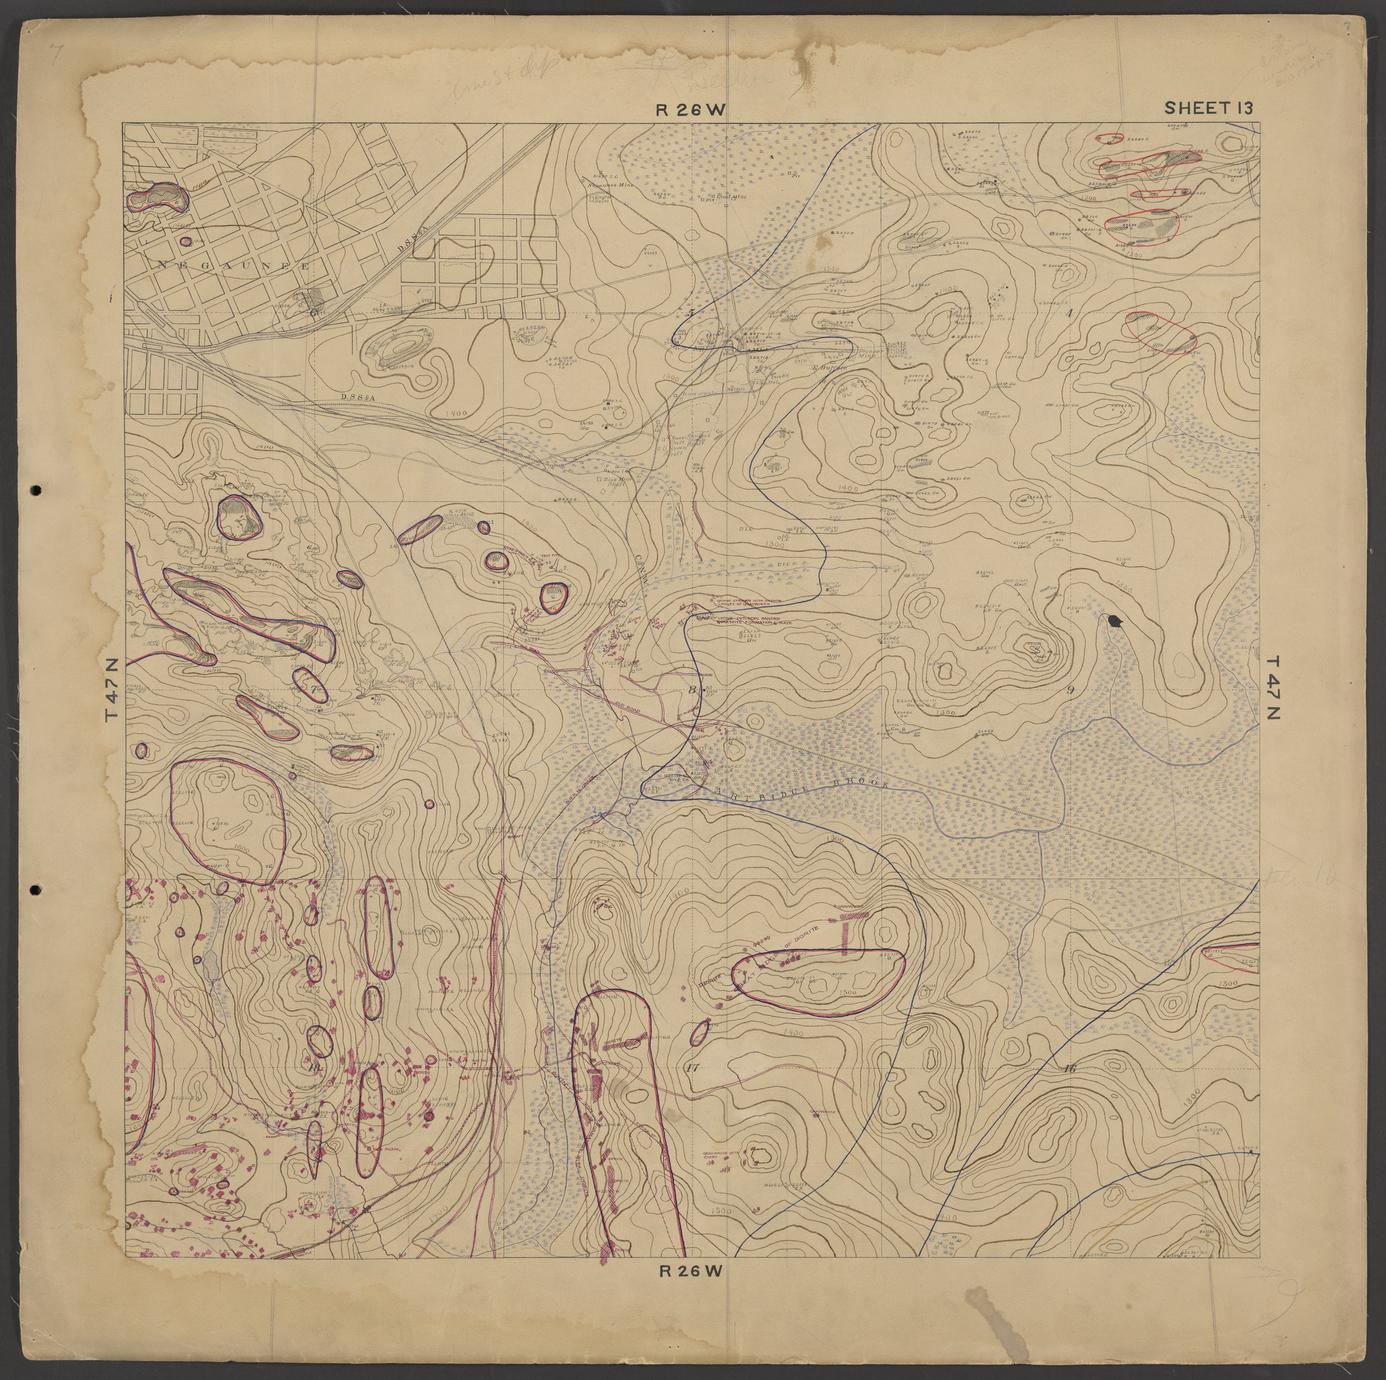 Geological map of Negaunee (Marquette County, Michigan)